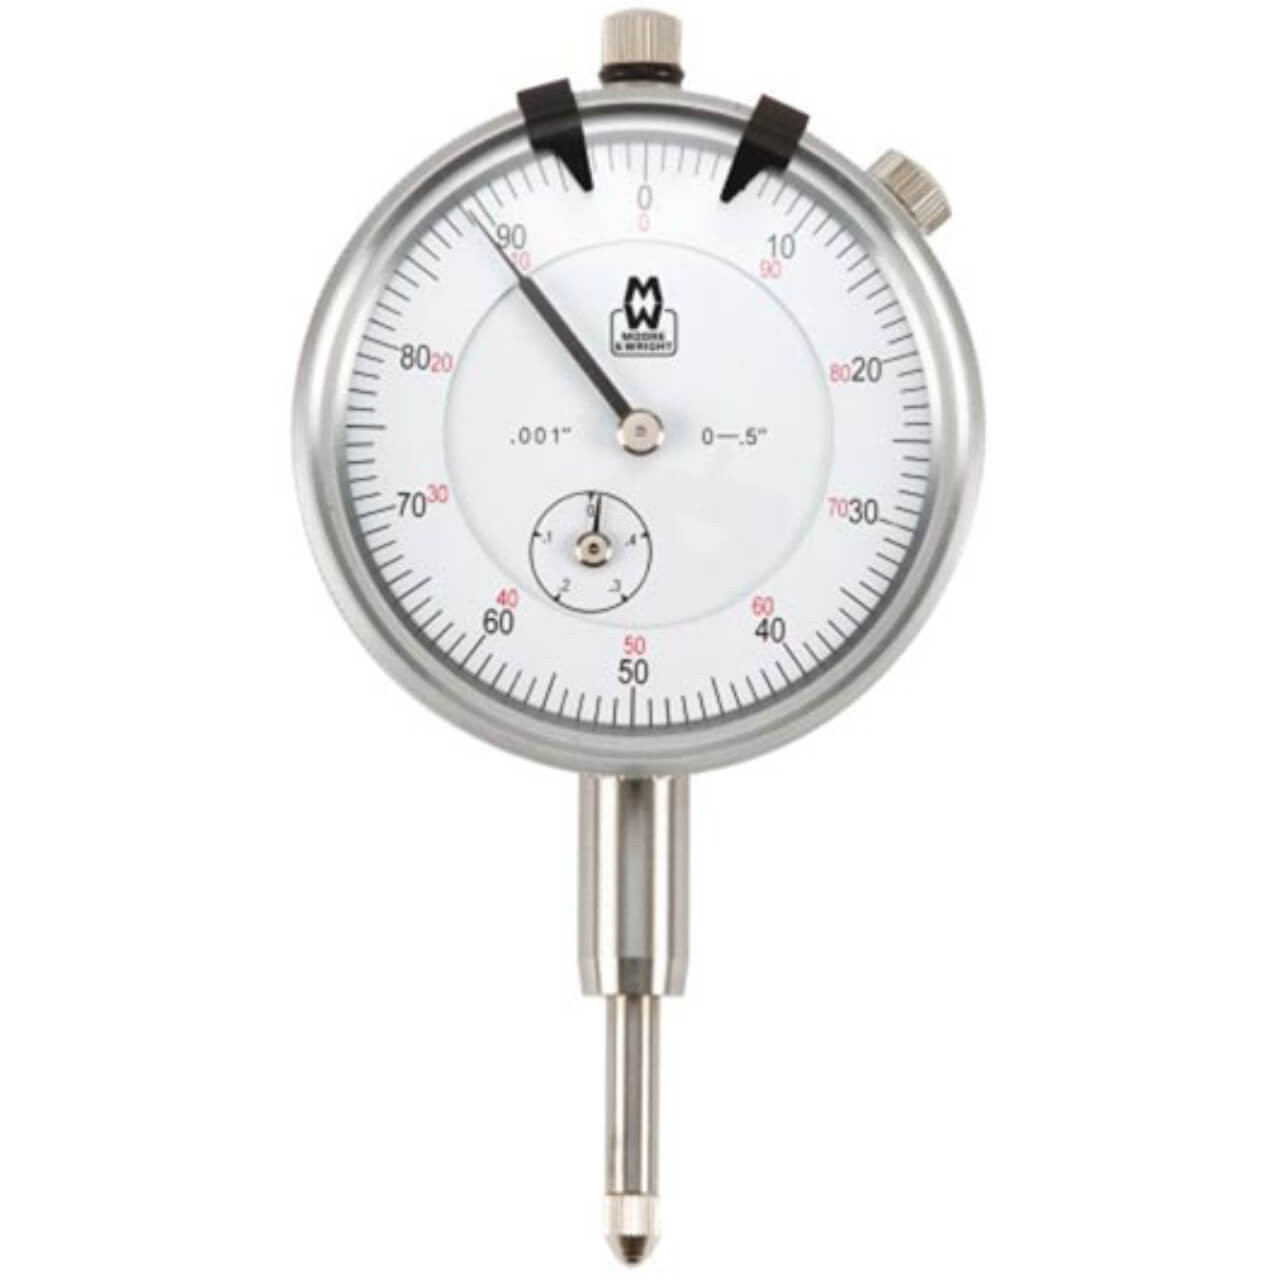 Moore & Wright Dial Indicator 0-1”